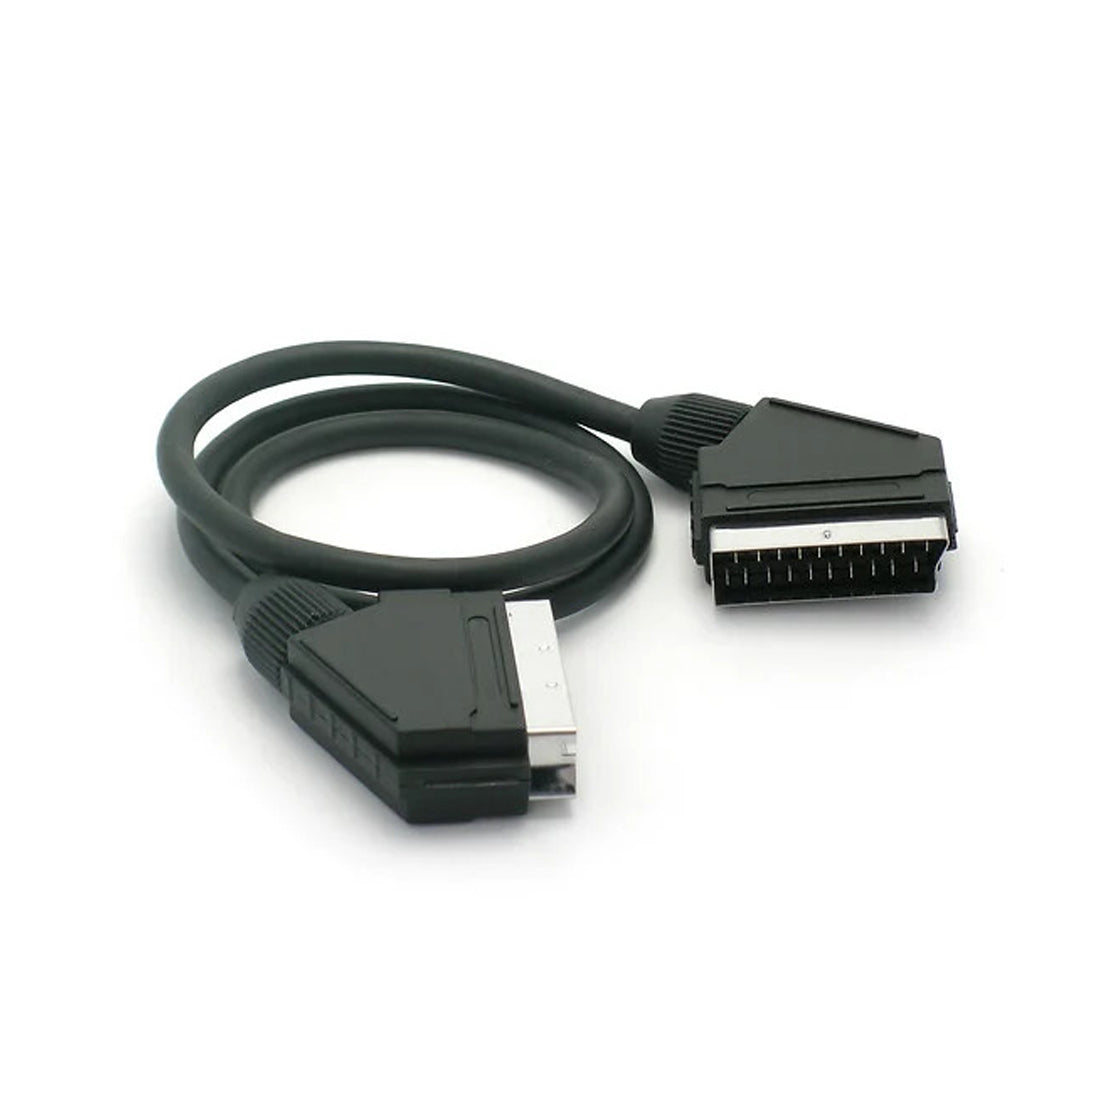 Metronic 21 Pole Audio Video Scart Cable 0.8m, Male to Male Scart Cable, Scart Socket for TV